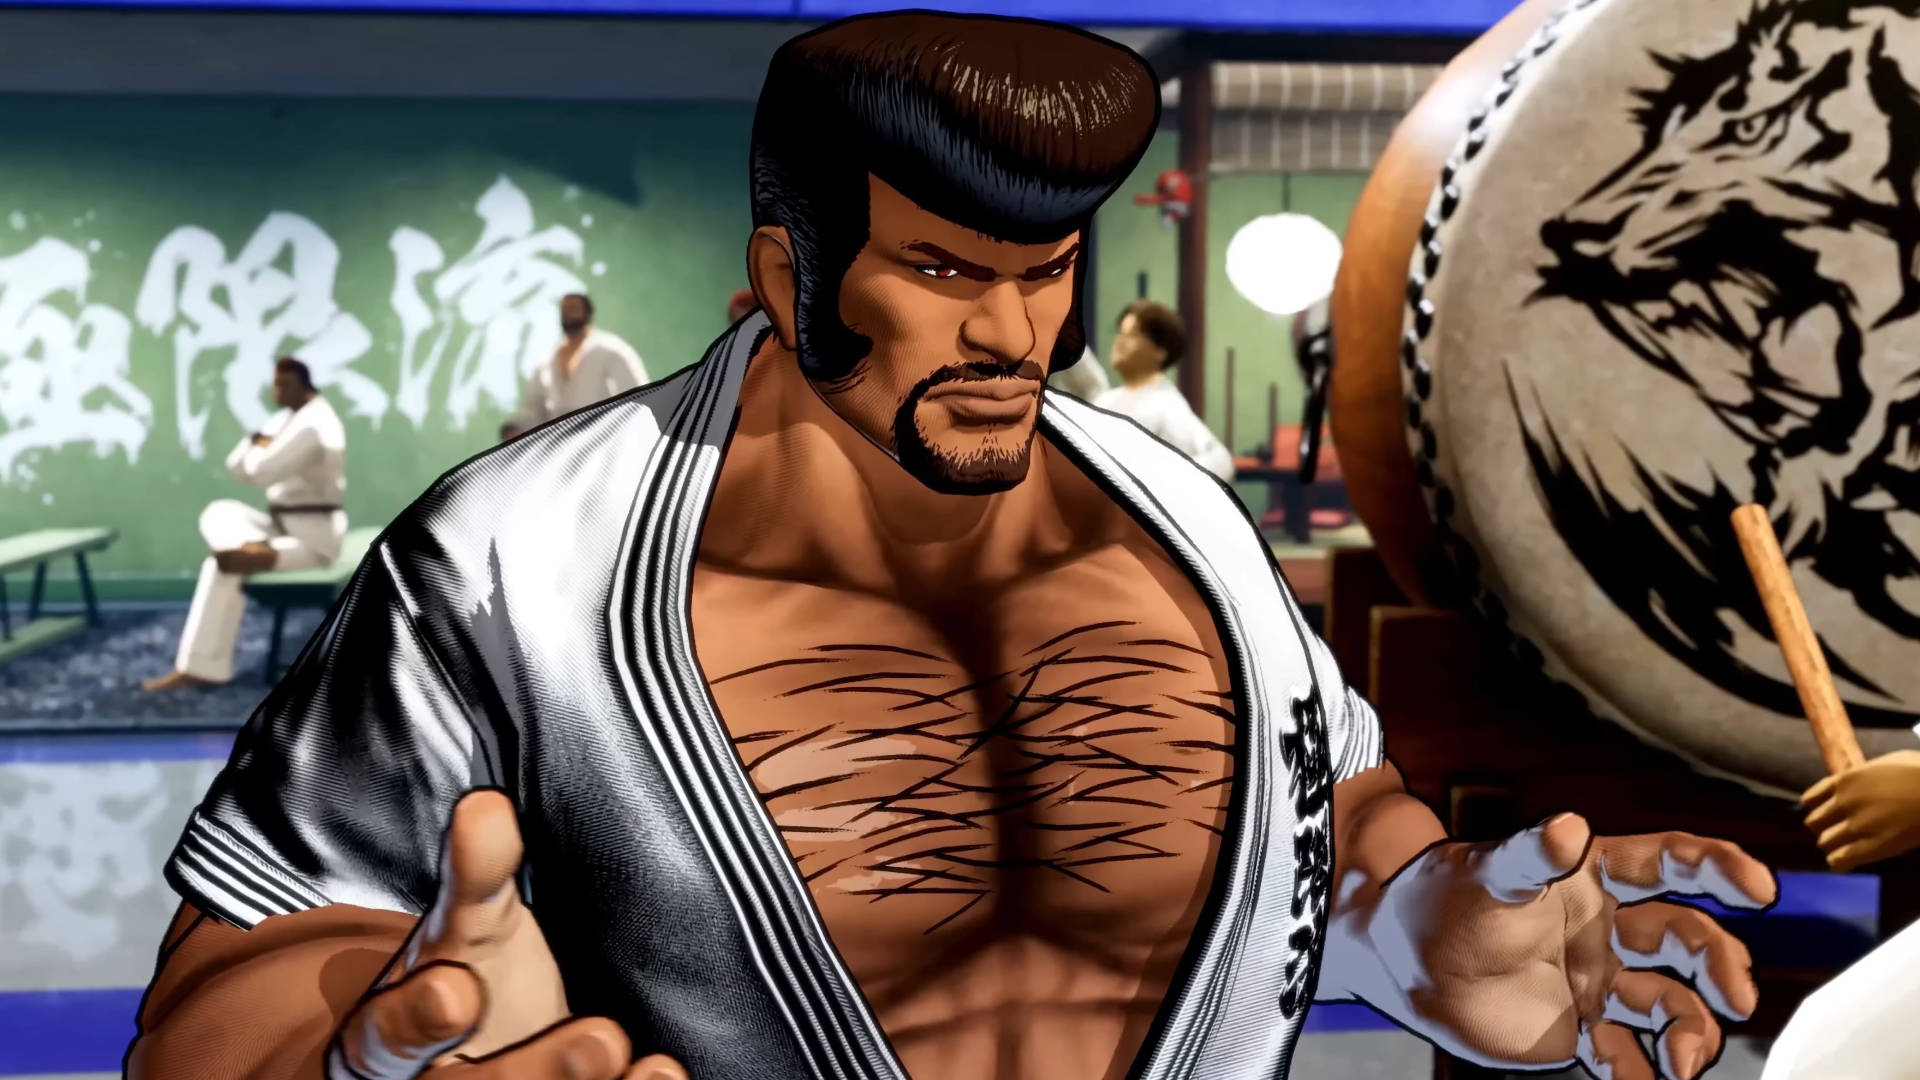 SNK: Neue Einblicke in Fatal Fury City of Wolves